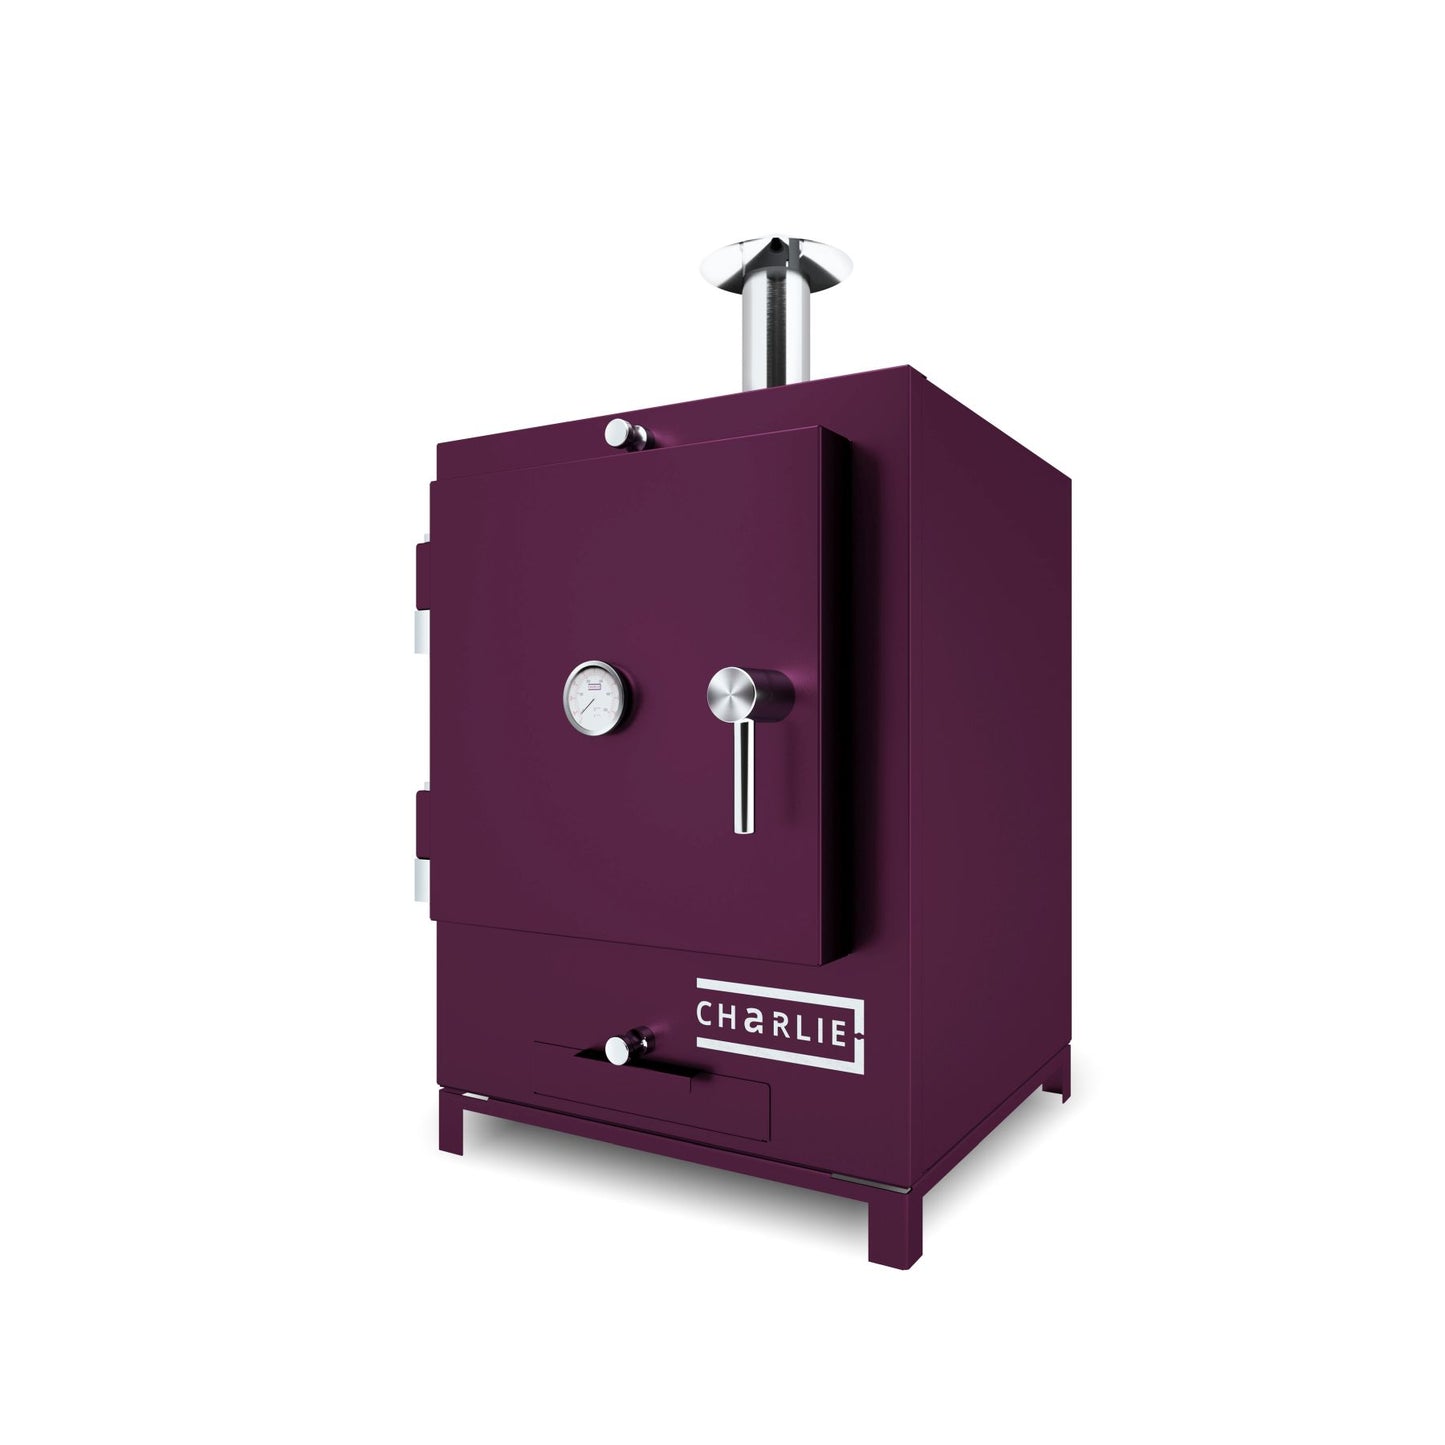 Charlie Charcoal Oven Tabletop - Beetroot